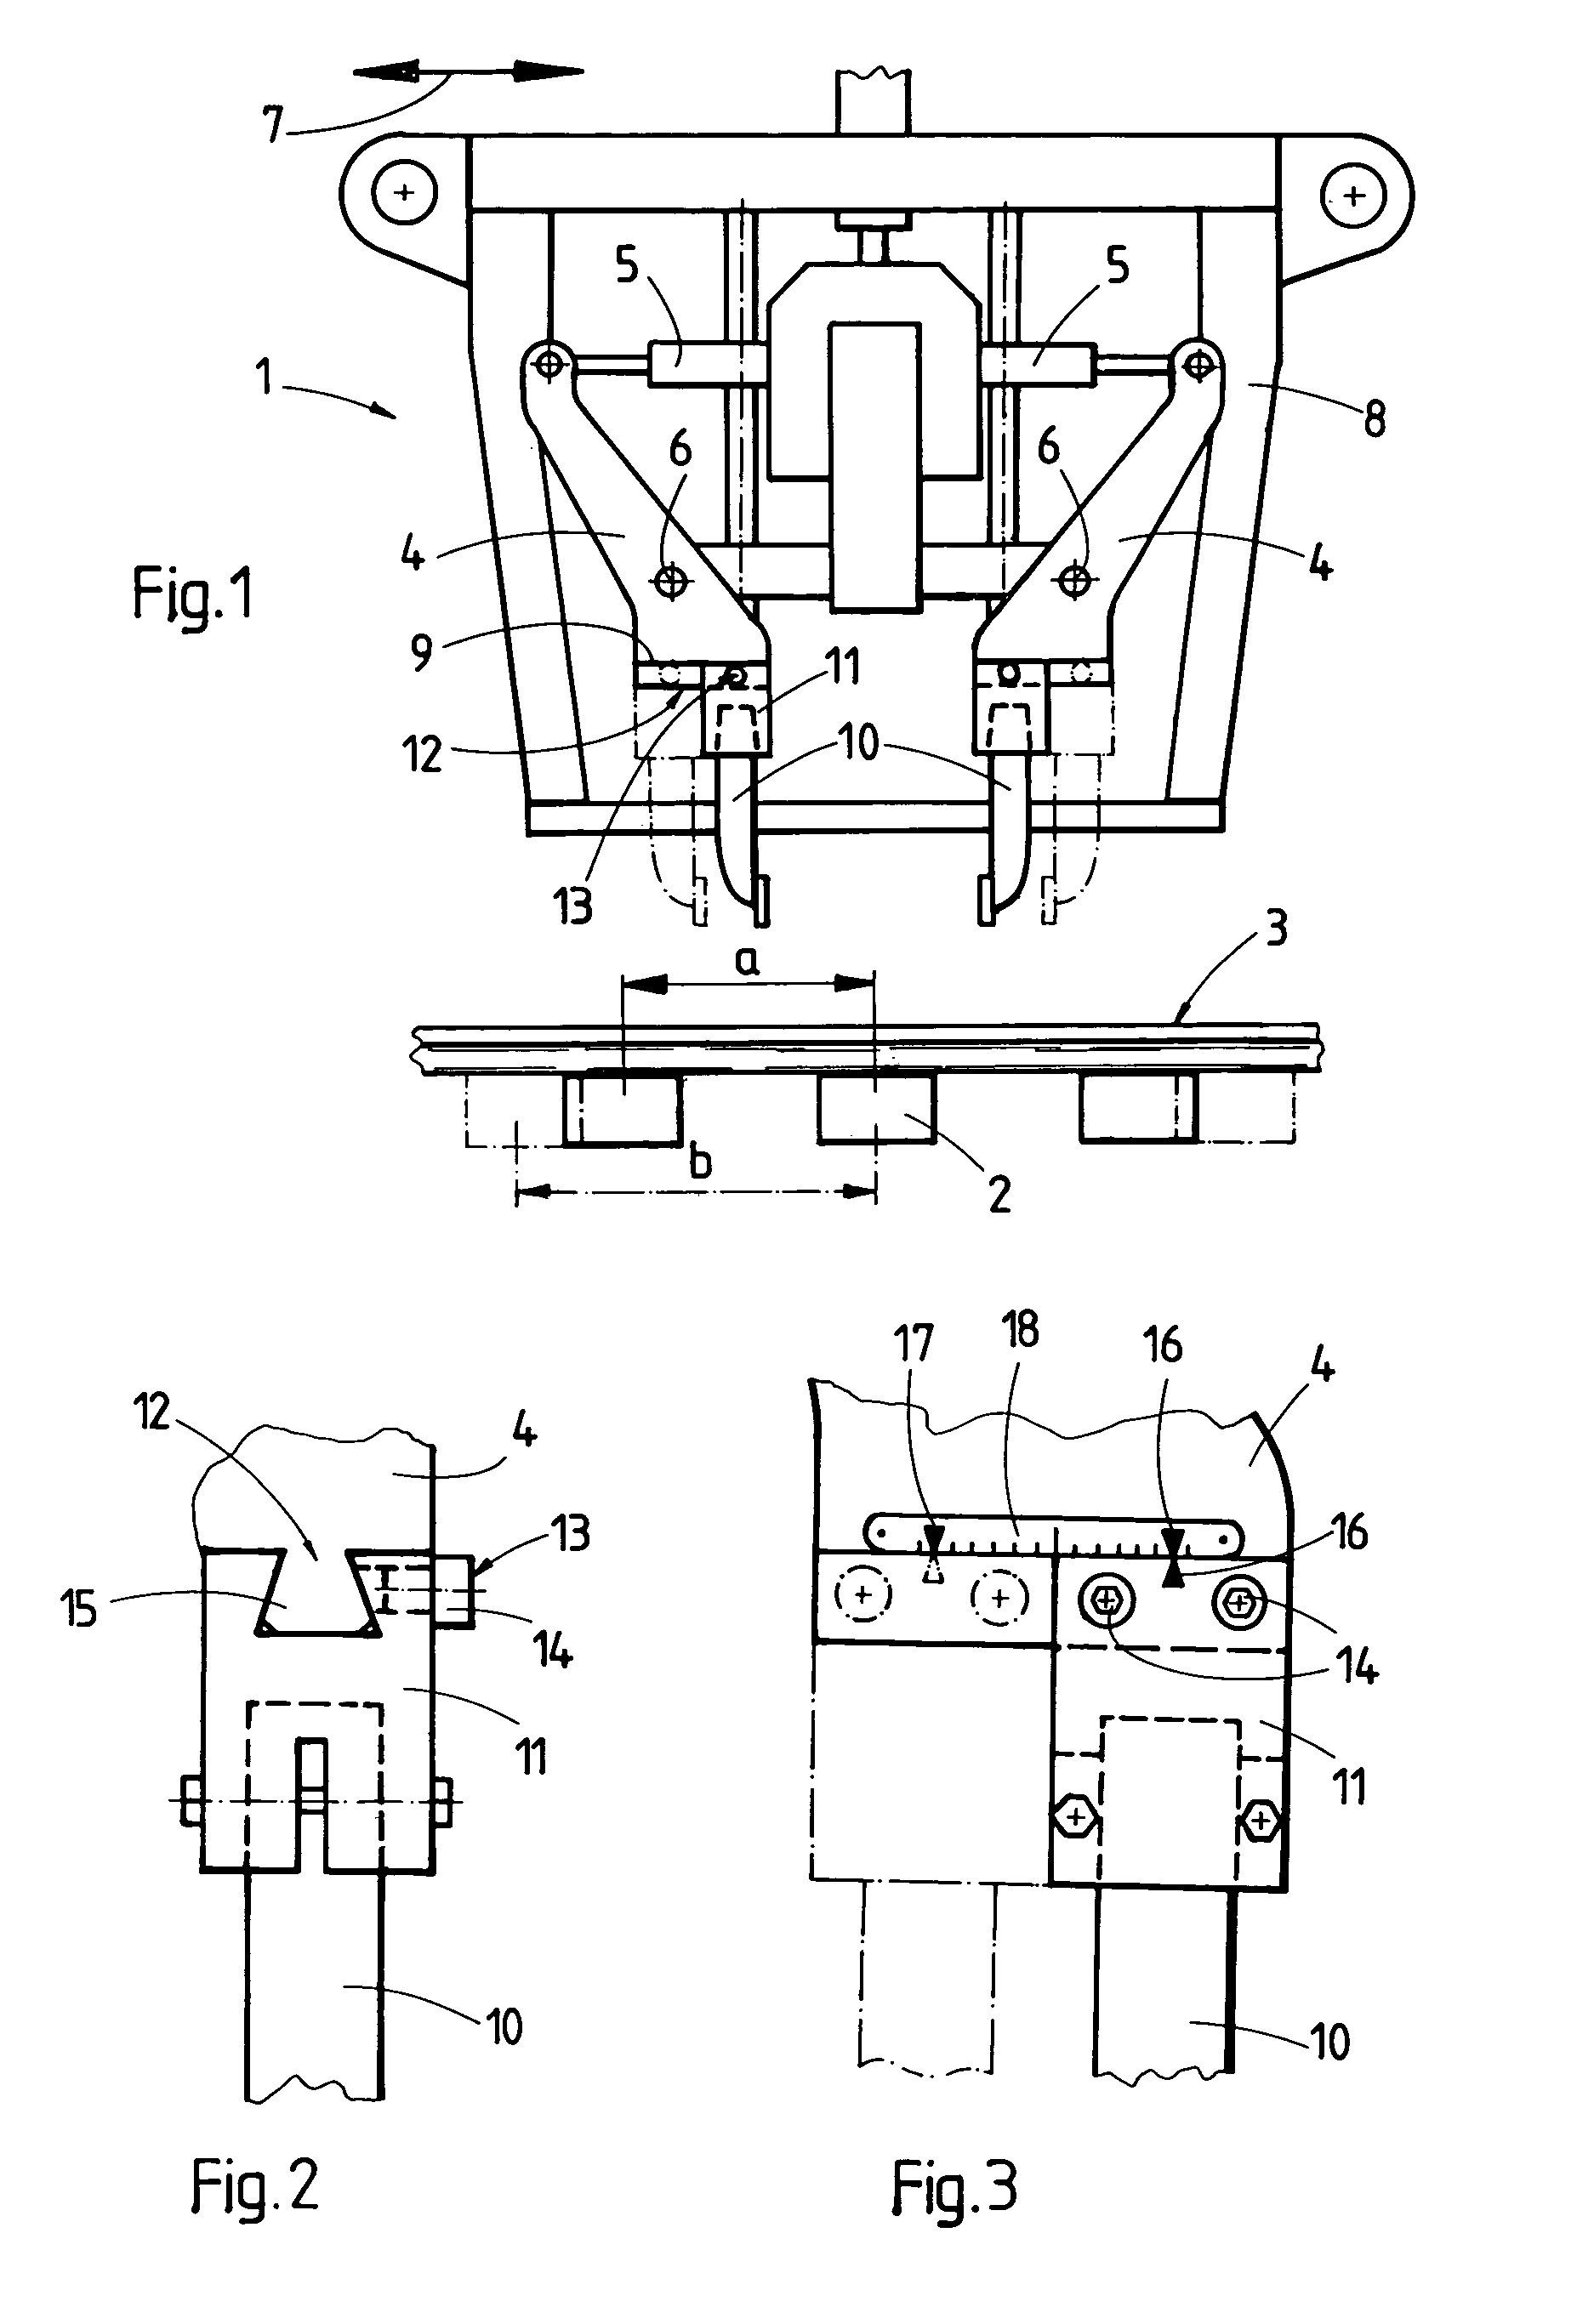 Tamping tool unit for tamping ballast